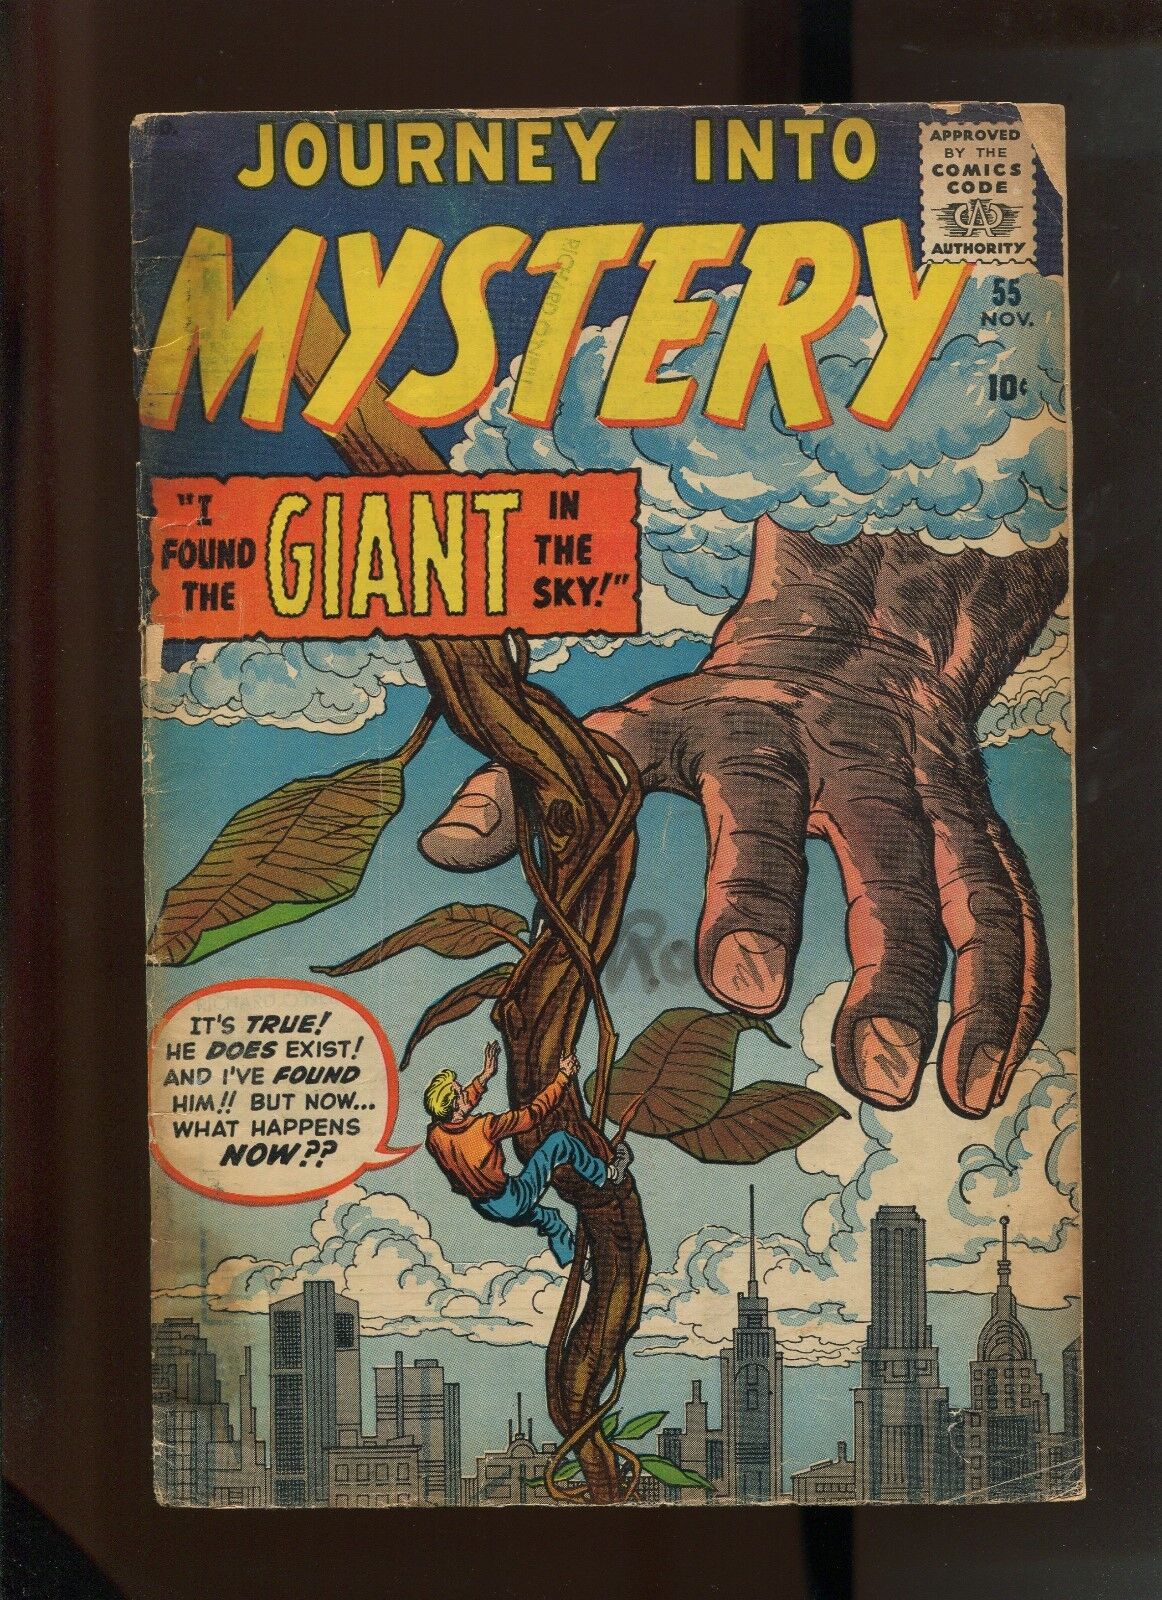 JOURNEY INTO MYSERY #55 (2.5) I FOUND THE GIANT IN THE SKY